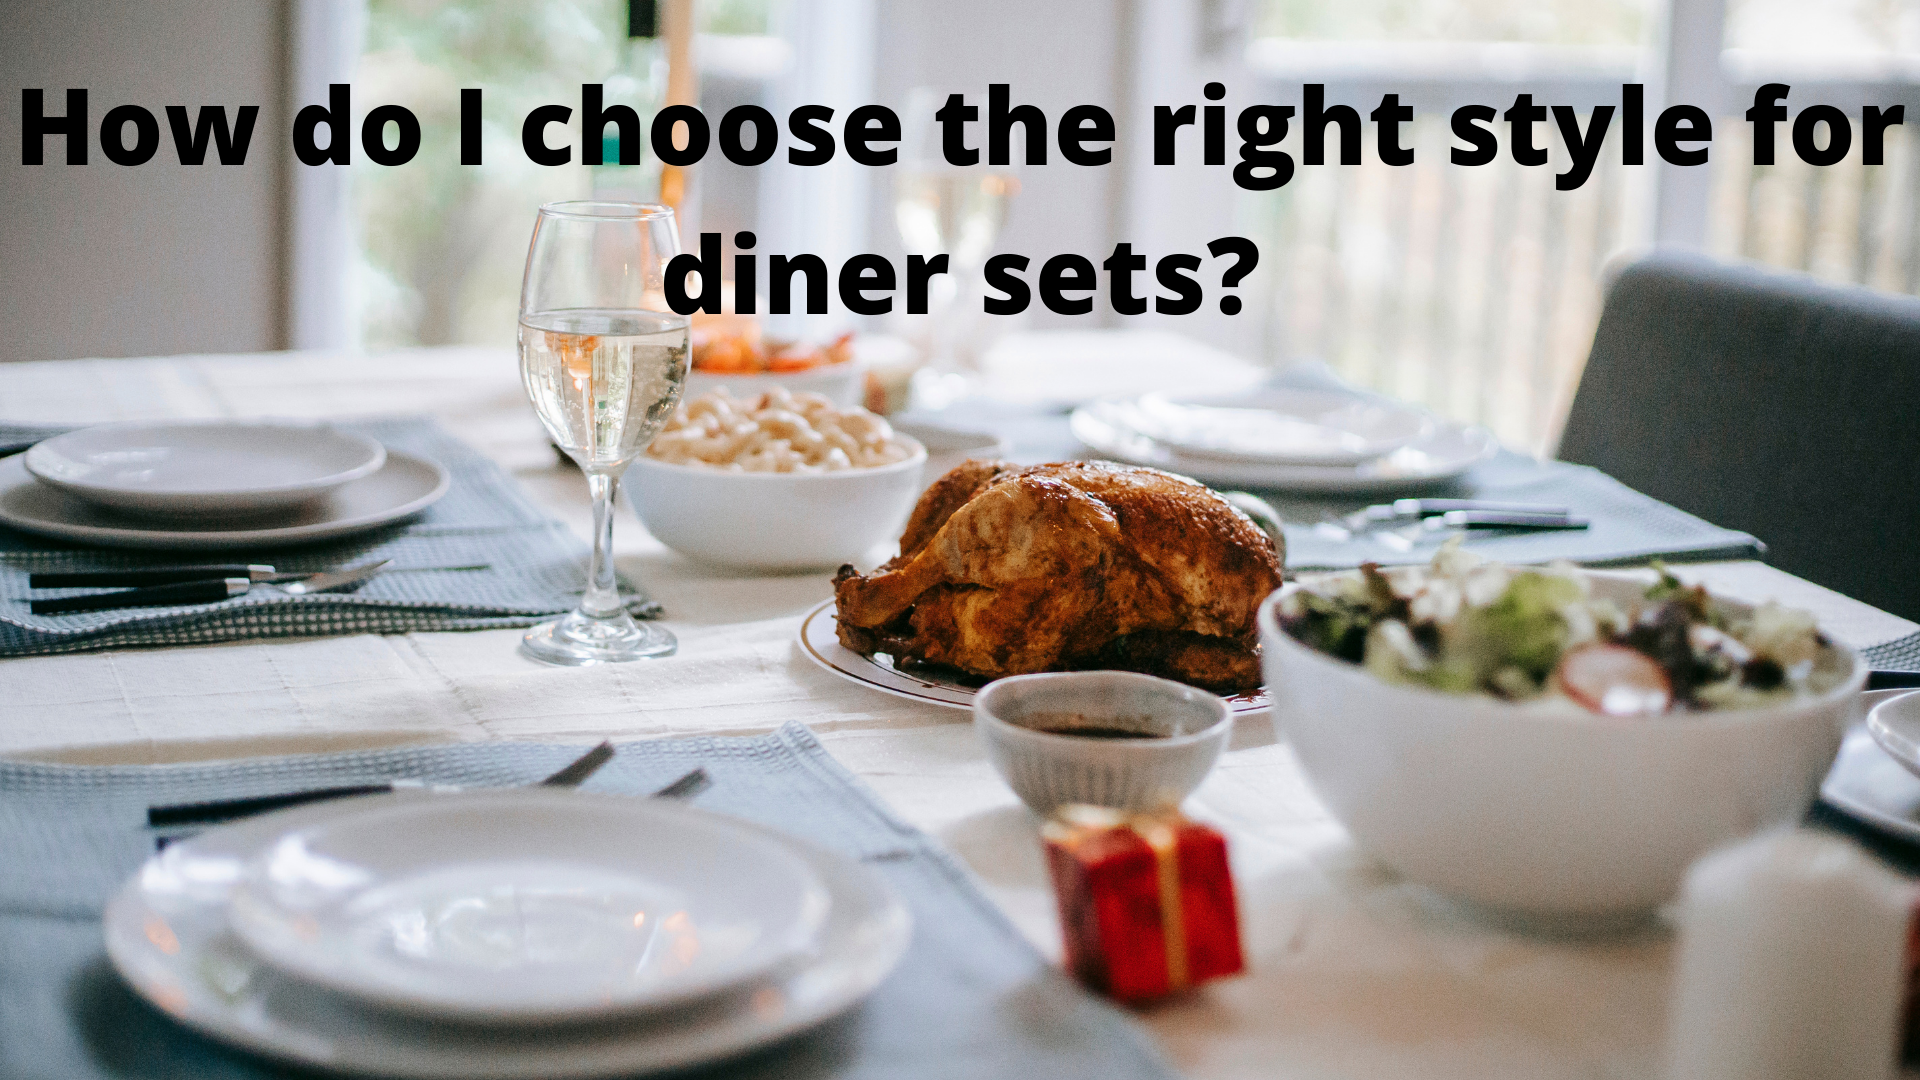 How do I choose the right style for diner sets?